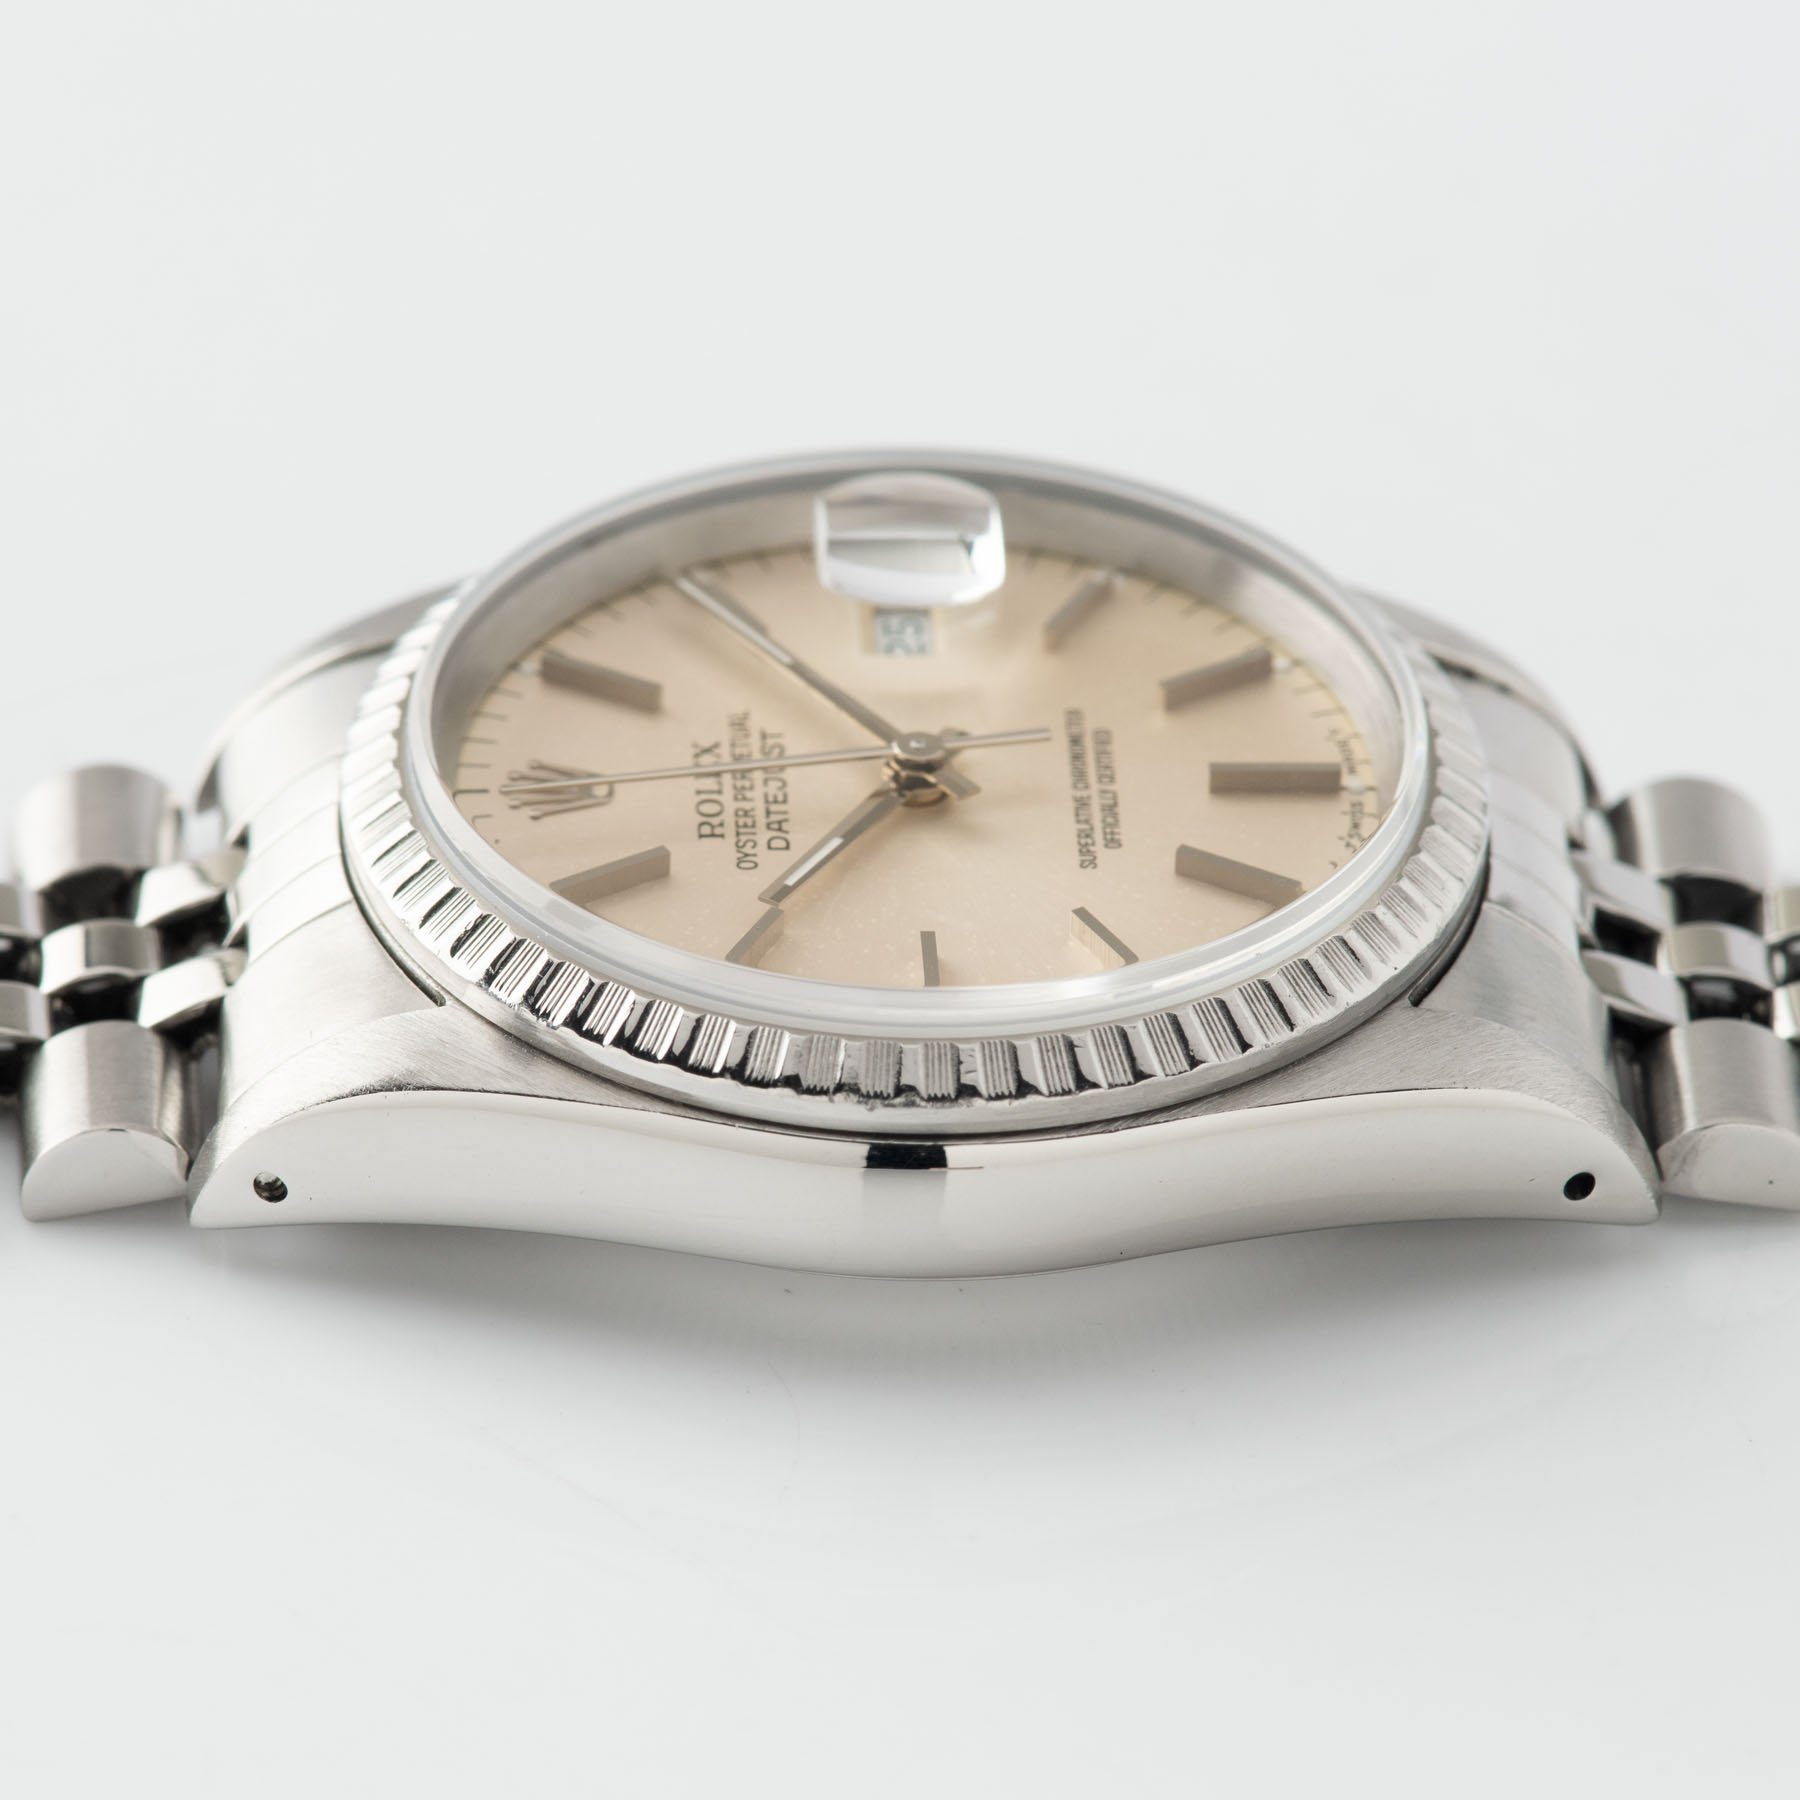 Rolex Datejust Silver Dial Reference 16220